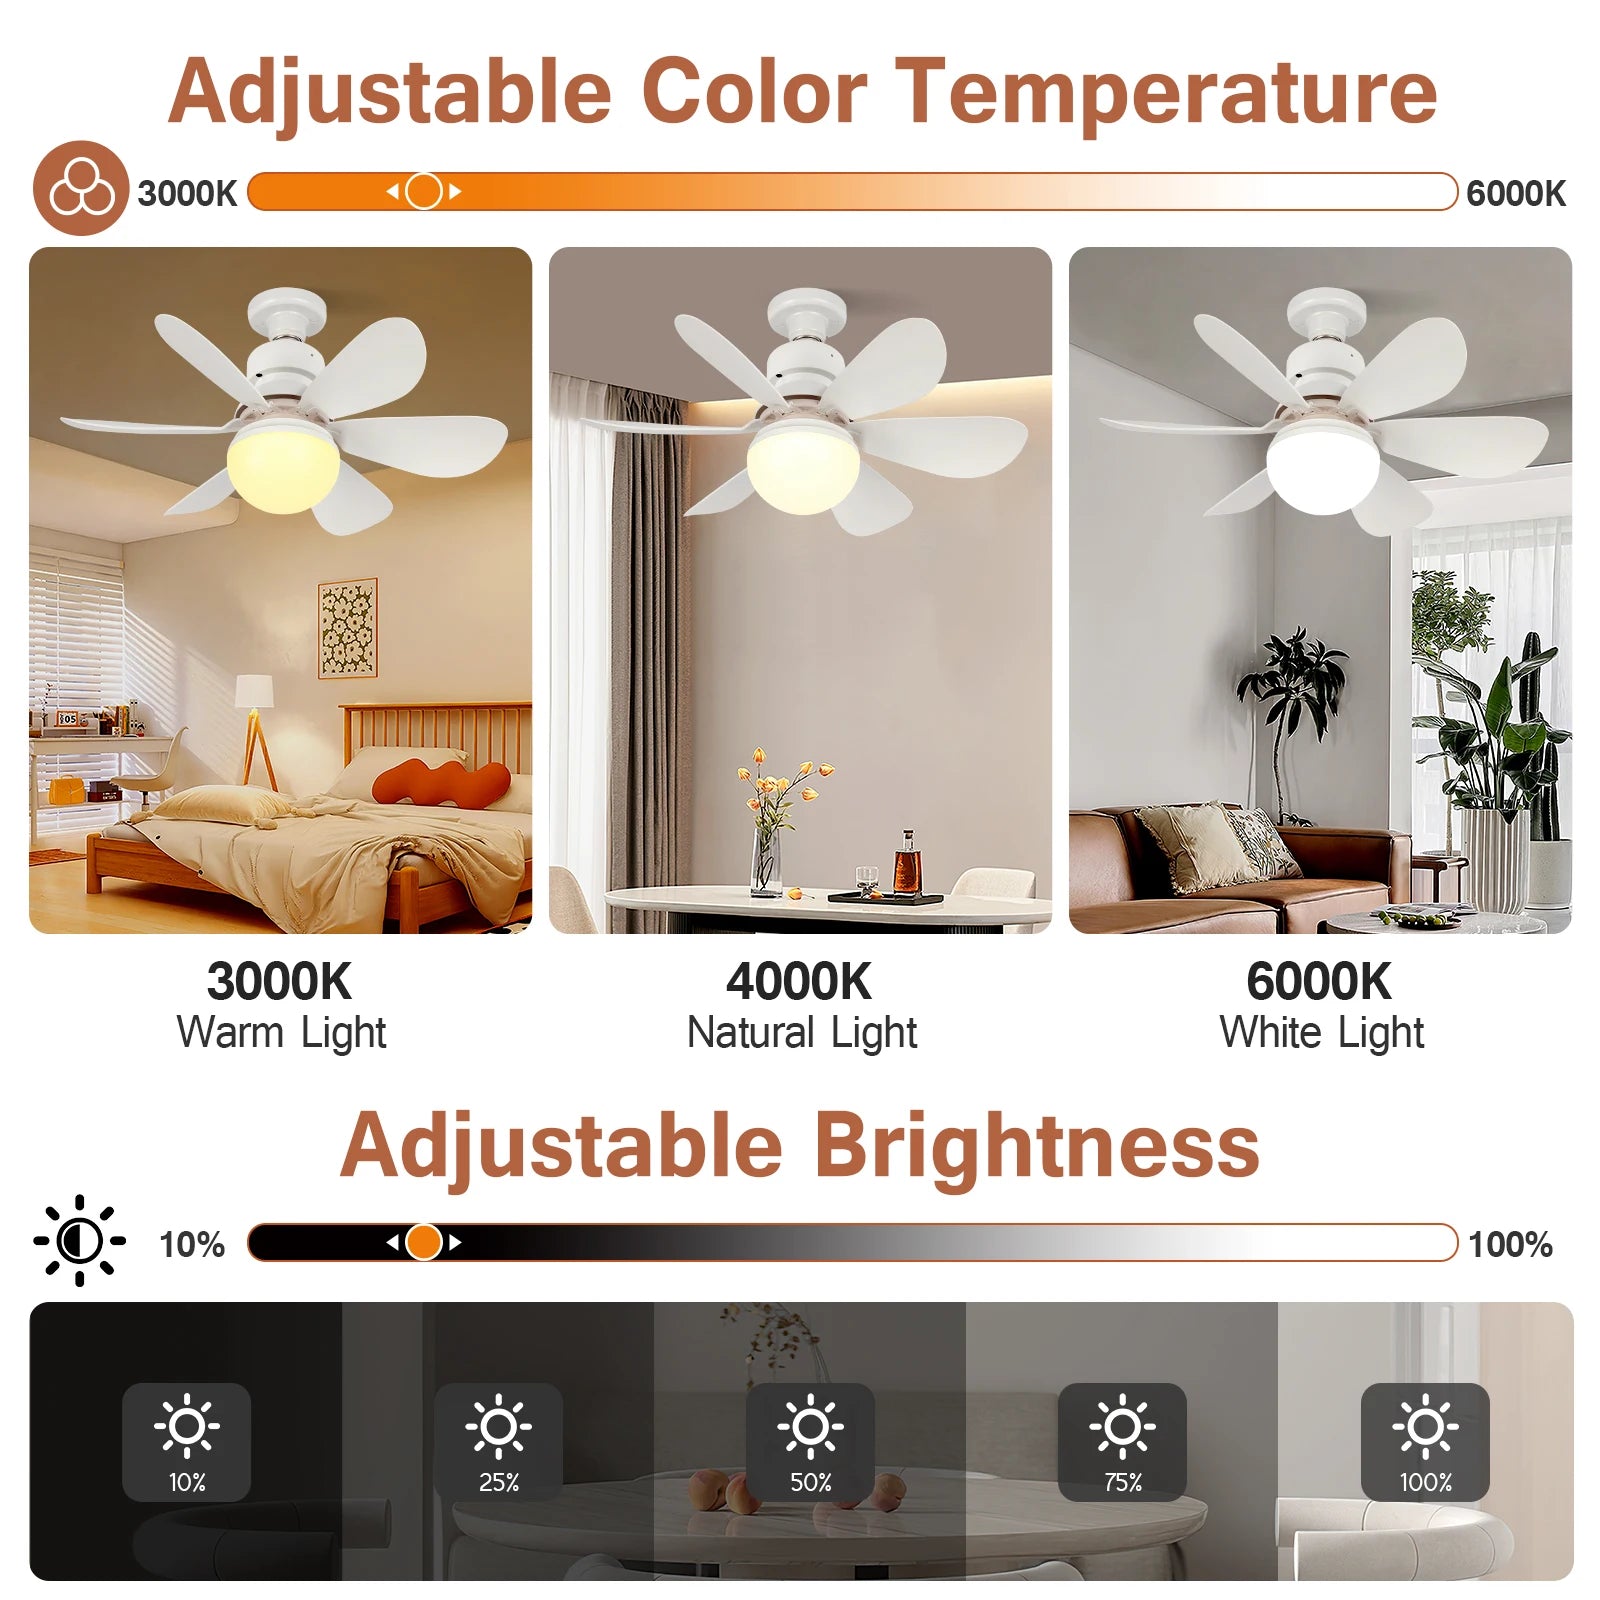 LED 30W ceiling fan light LED  fan ceiling light with remote dimming function suitable for living room  study  and home use